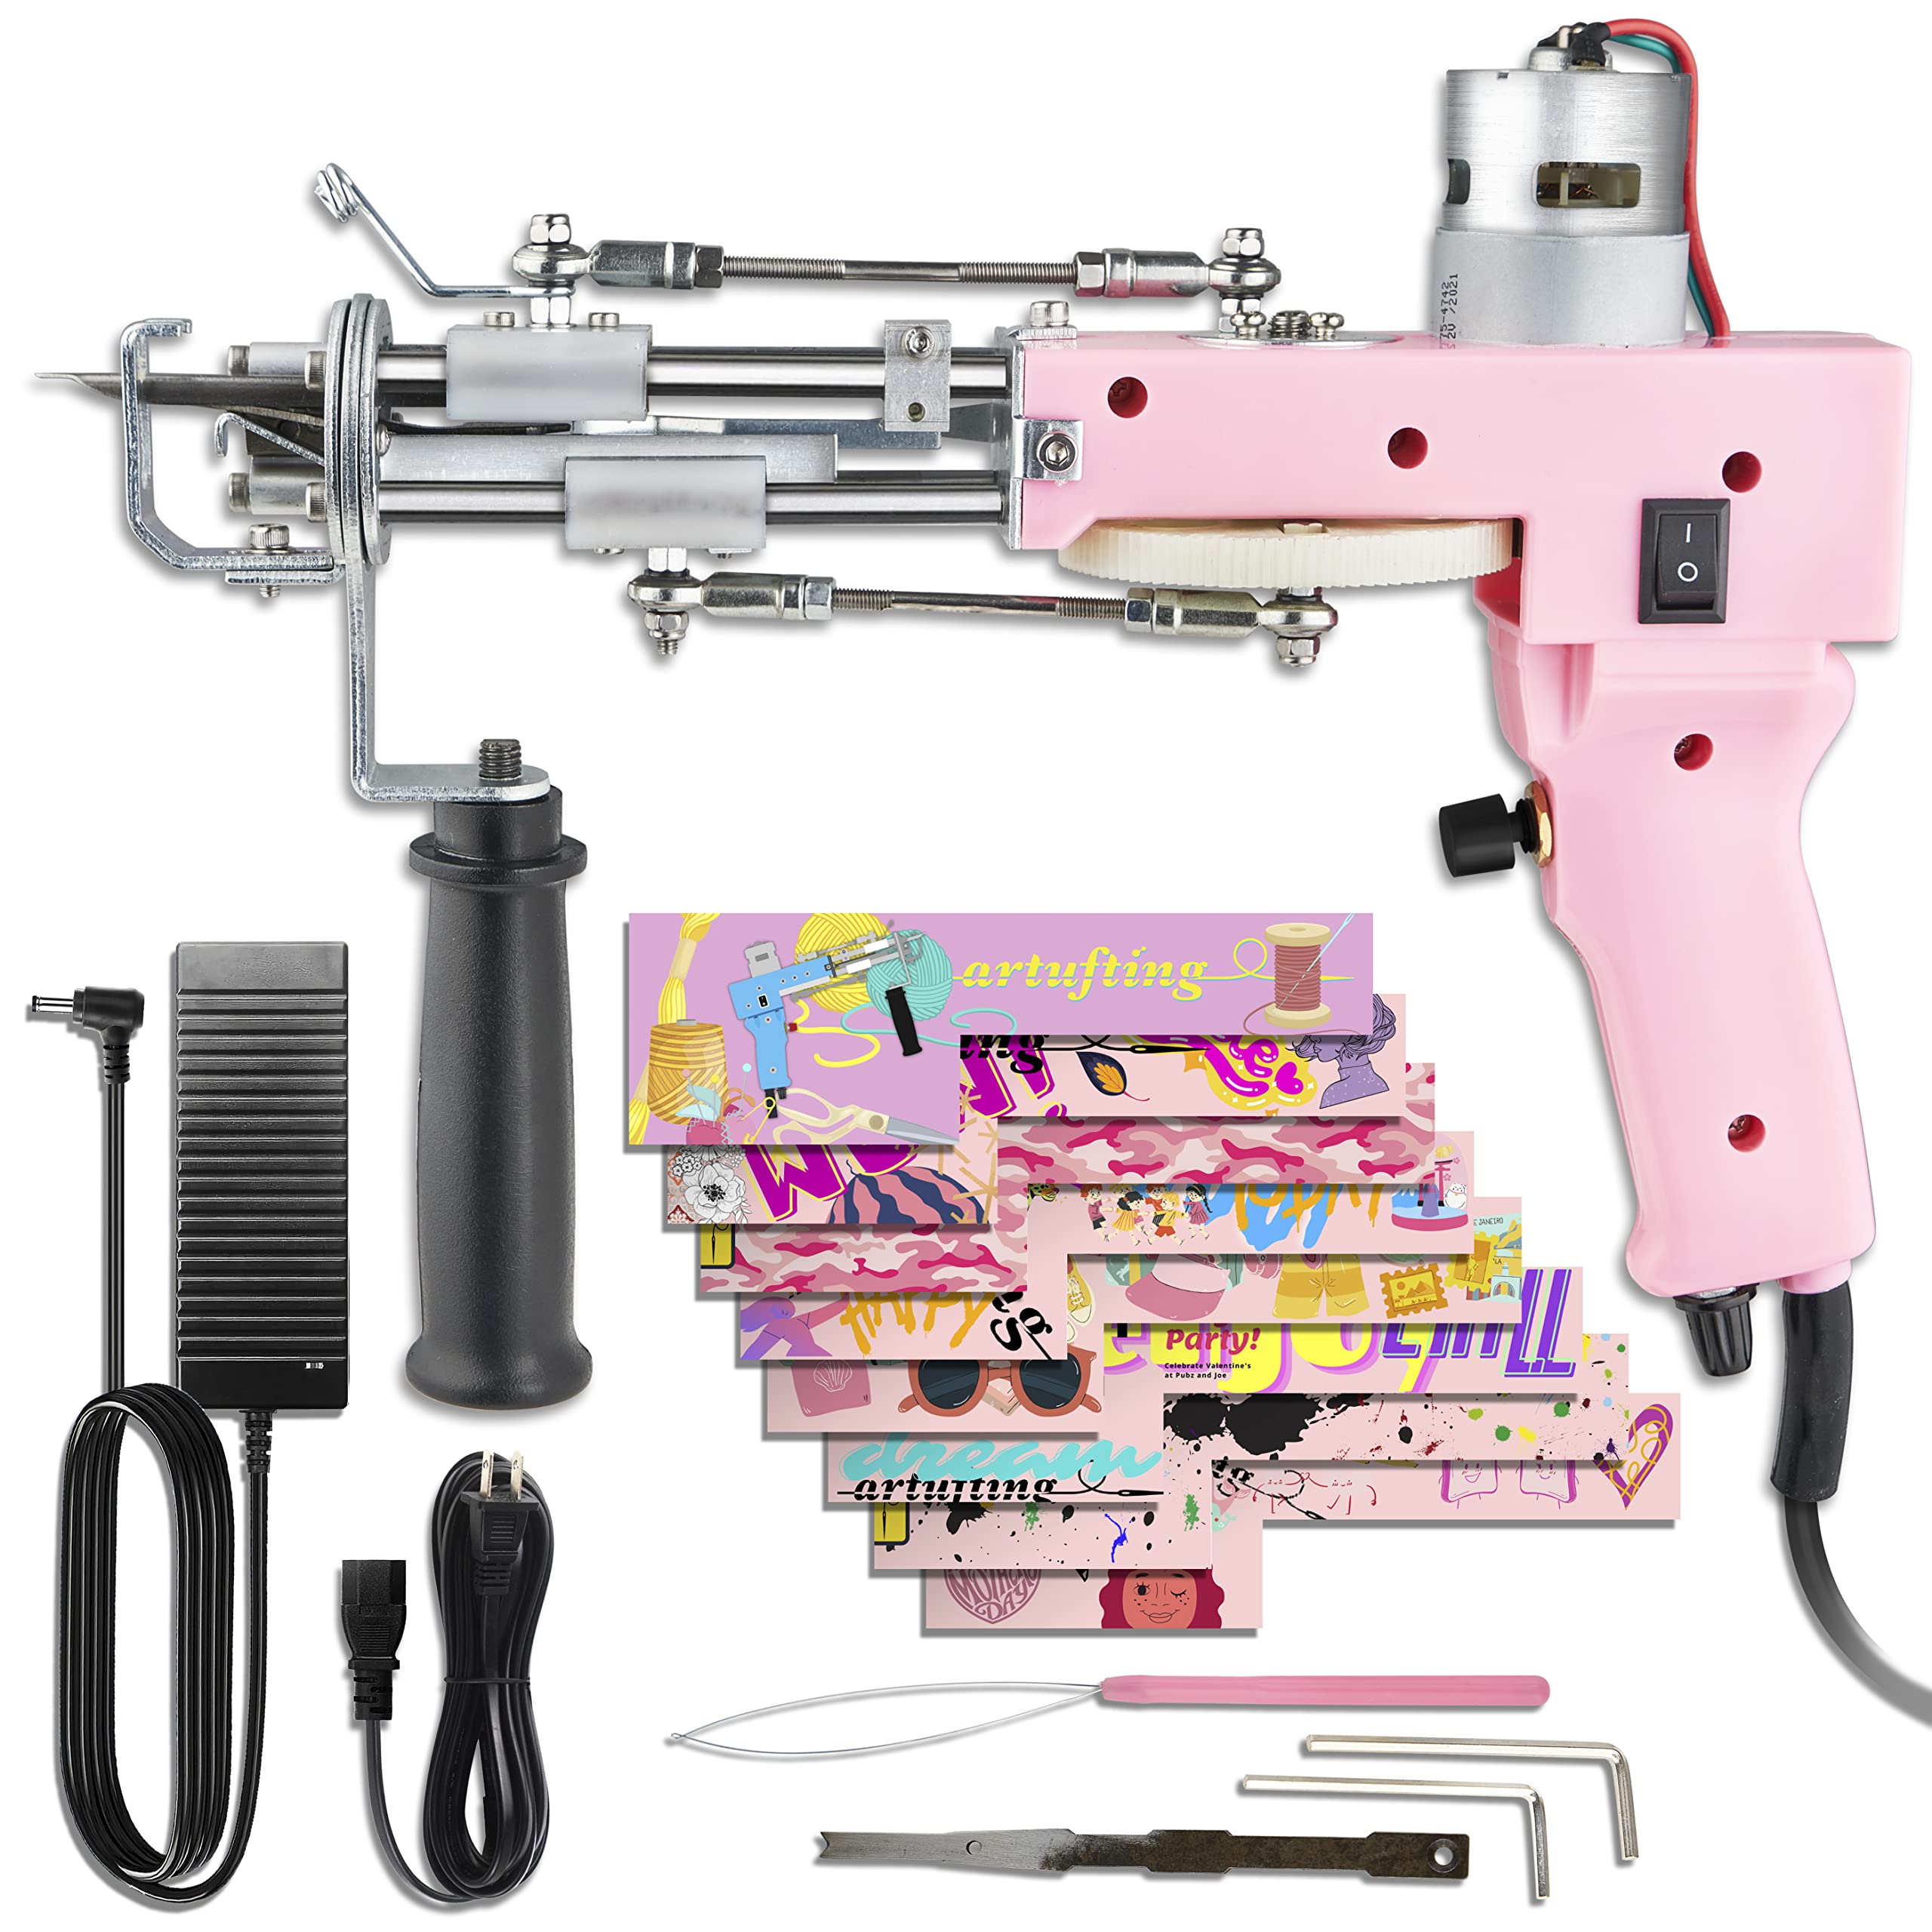 Tufting Gluing Machine, The Glue Applicator for Rug Making, Rug Gun Machine  Starter Kit for High-Speed Weaving of Carpets, Used for Tufting Gun and